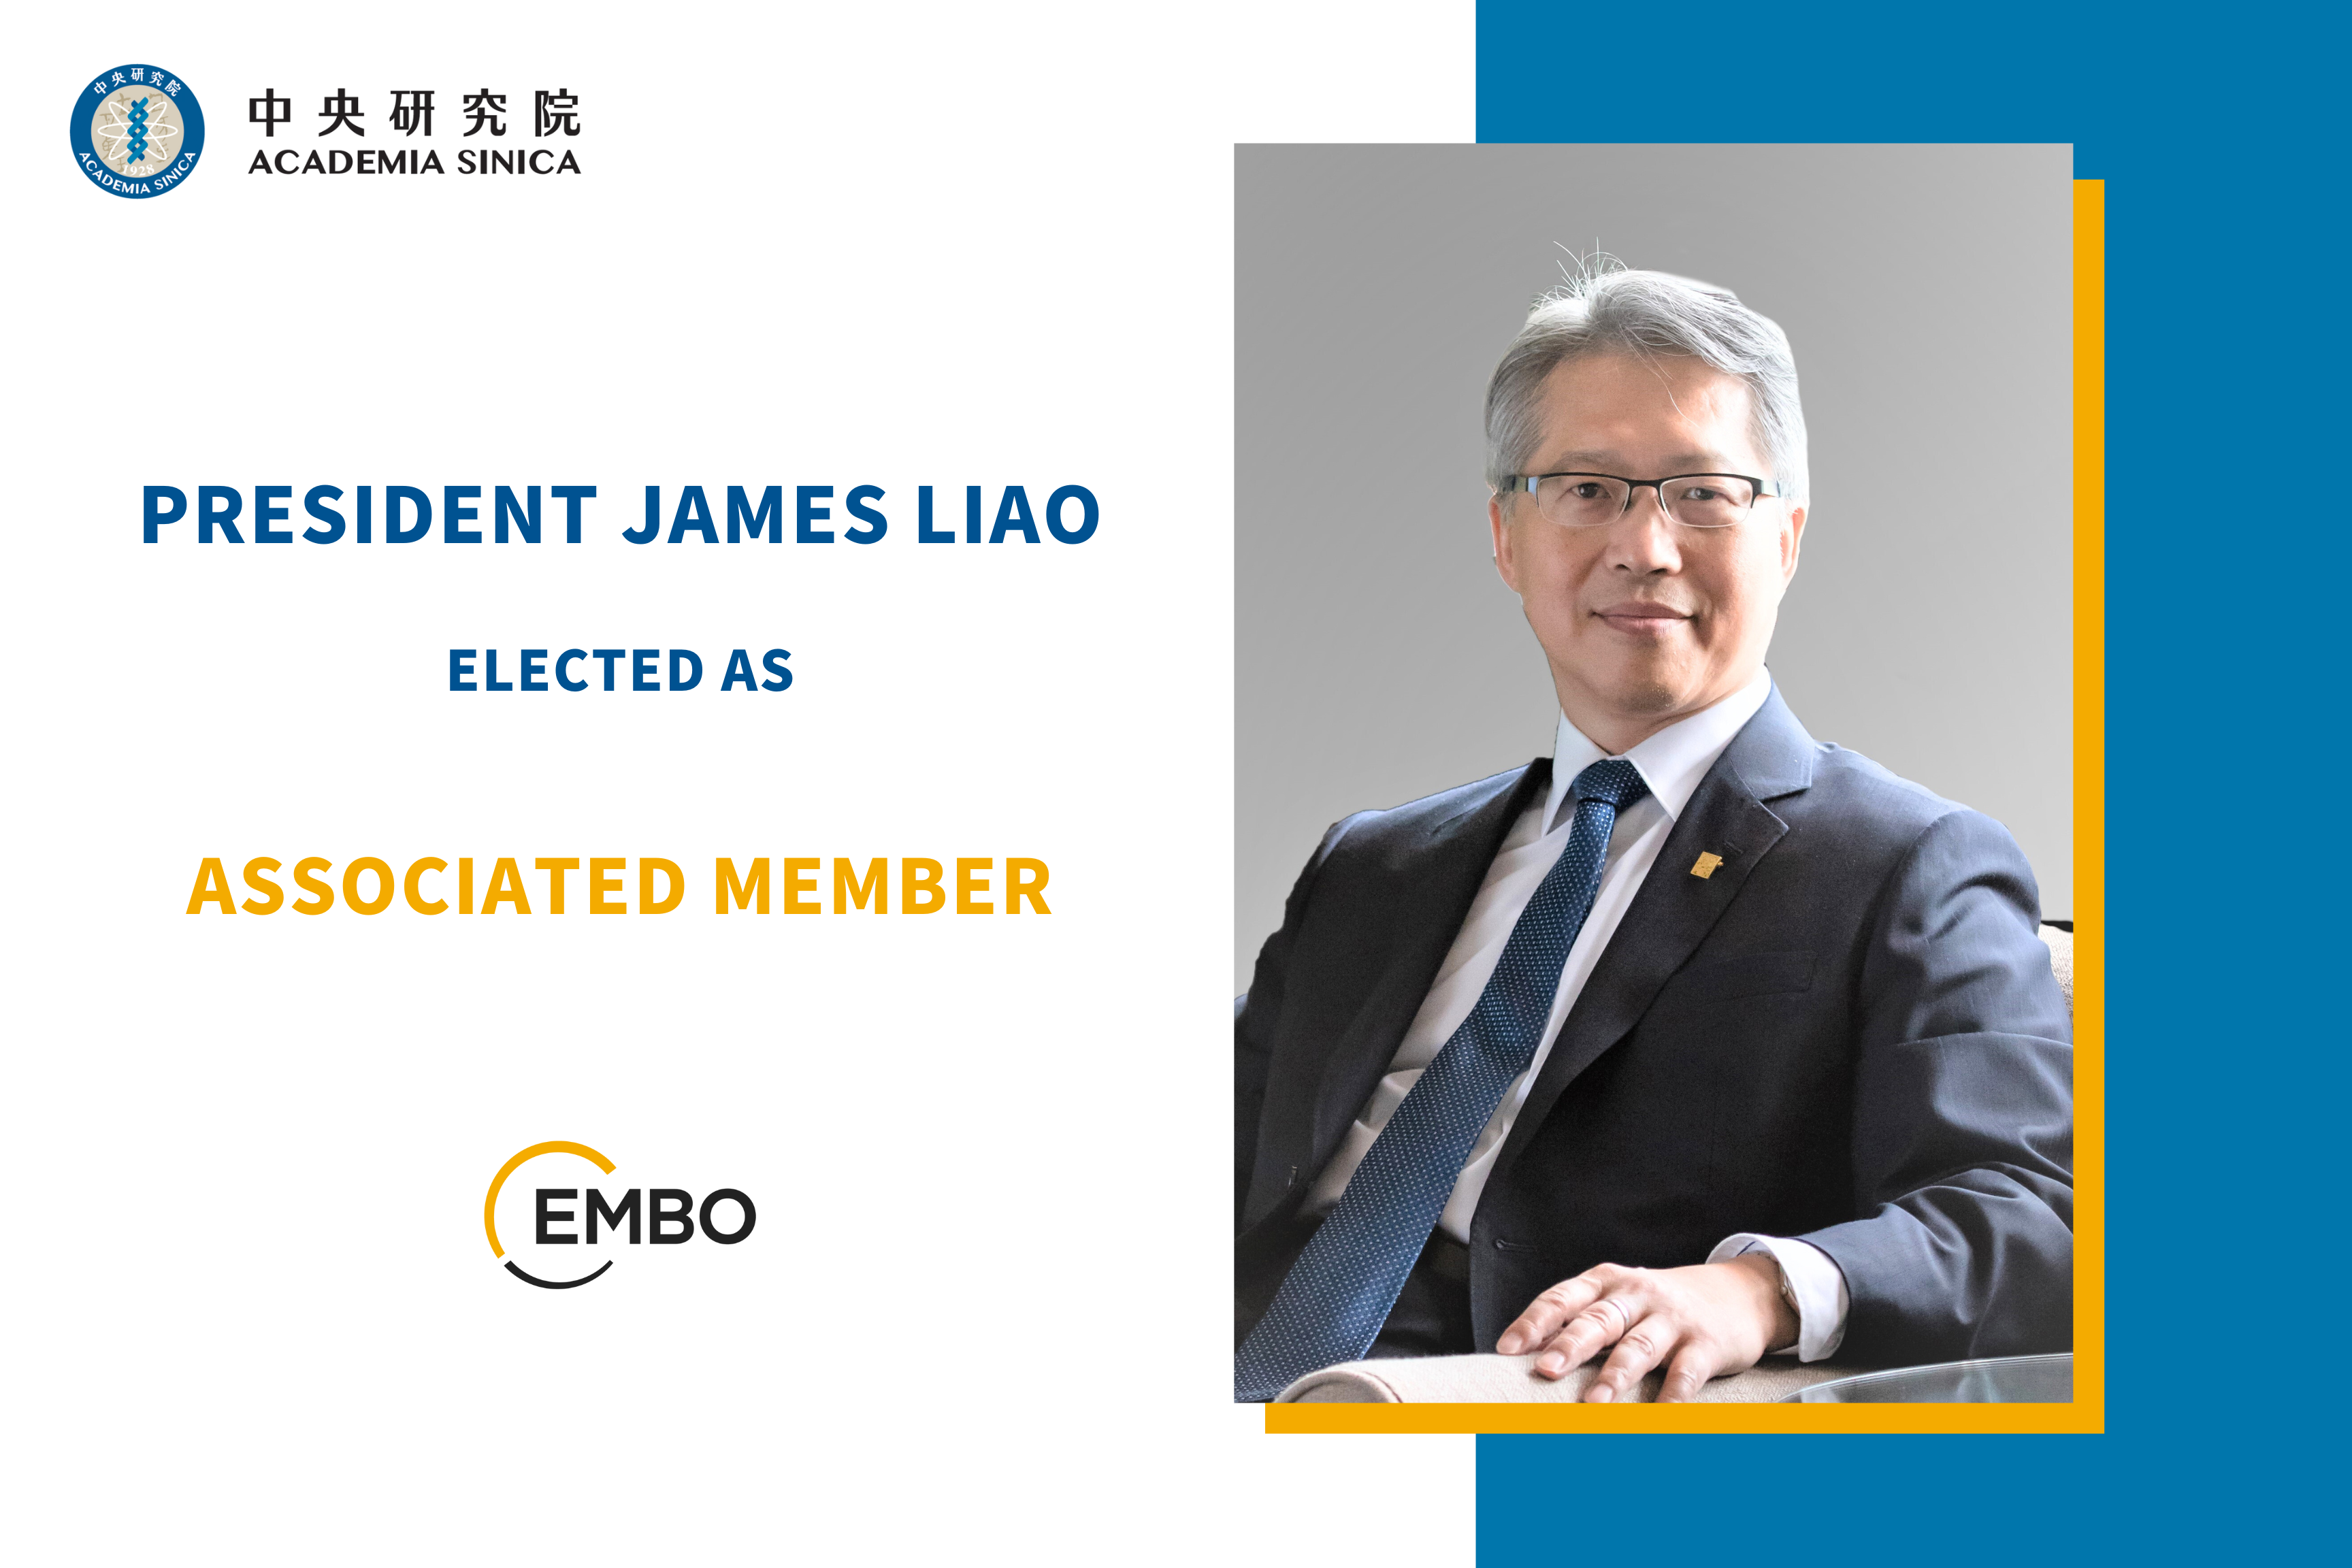 Academia Sinica President James Liao Elected as EMBO Associate Member for Advances in Synthetic Biology